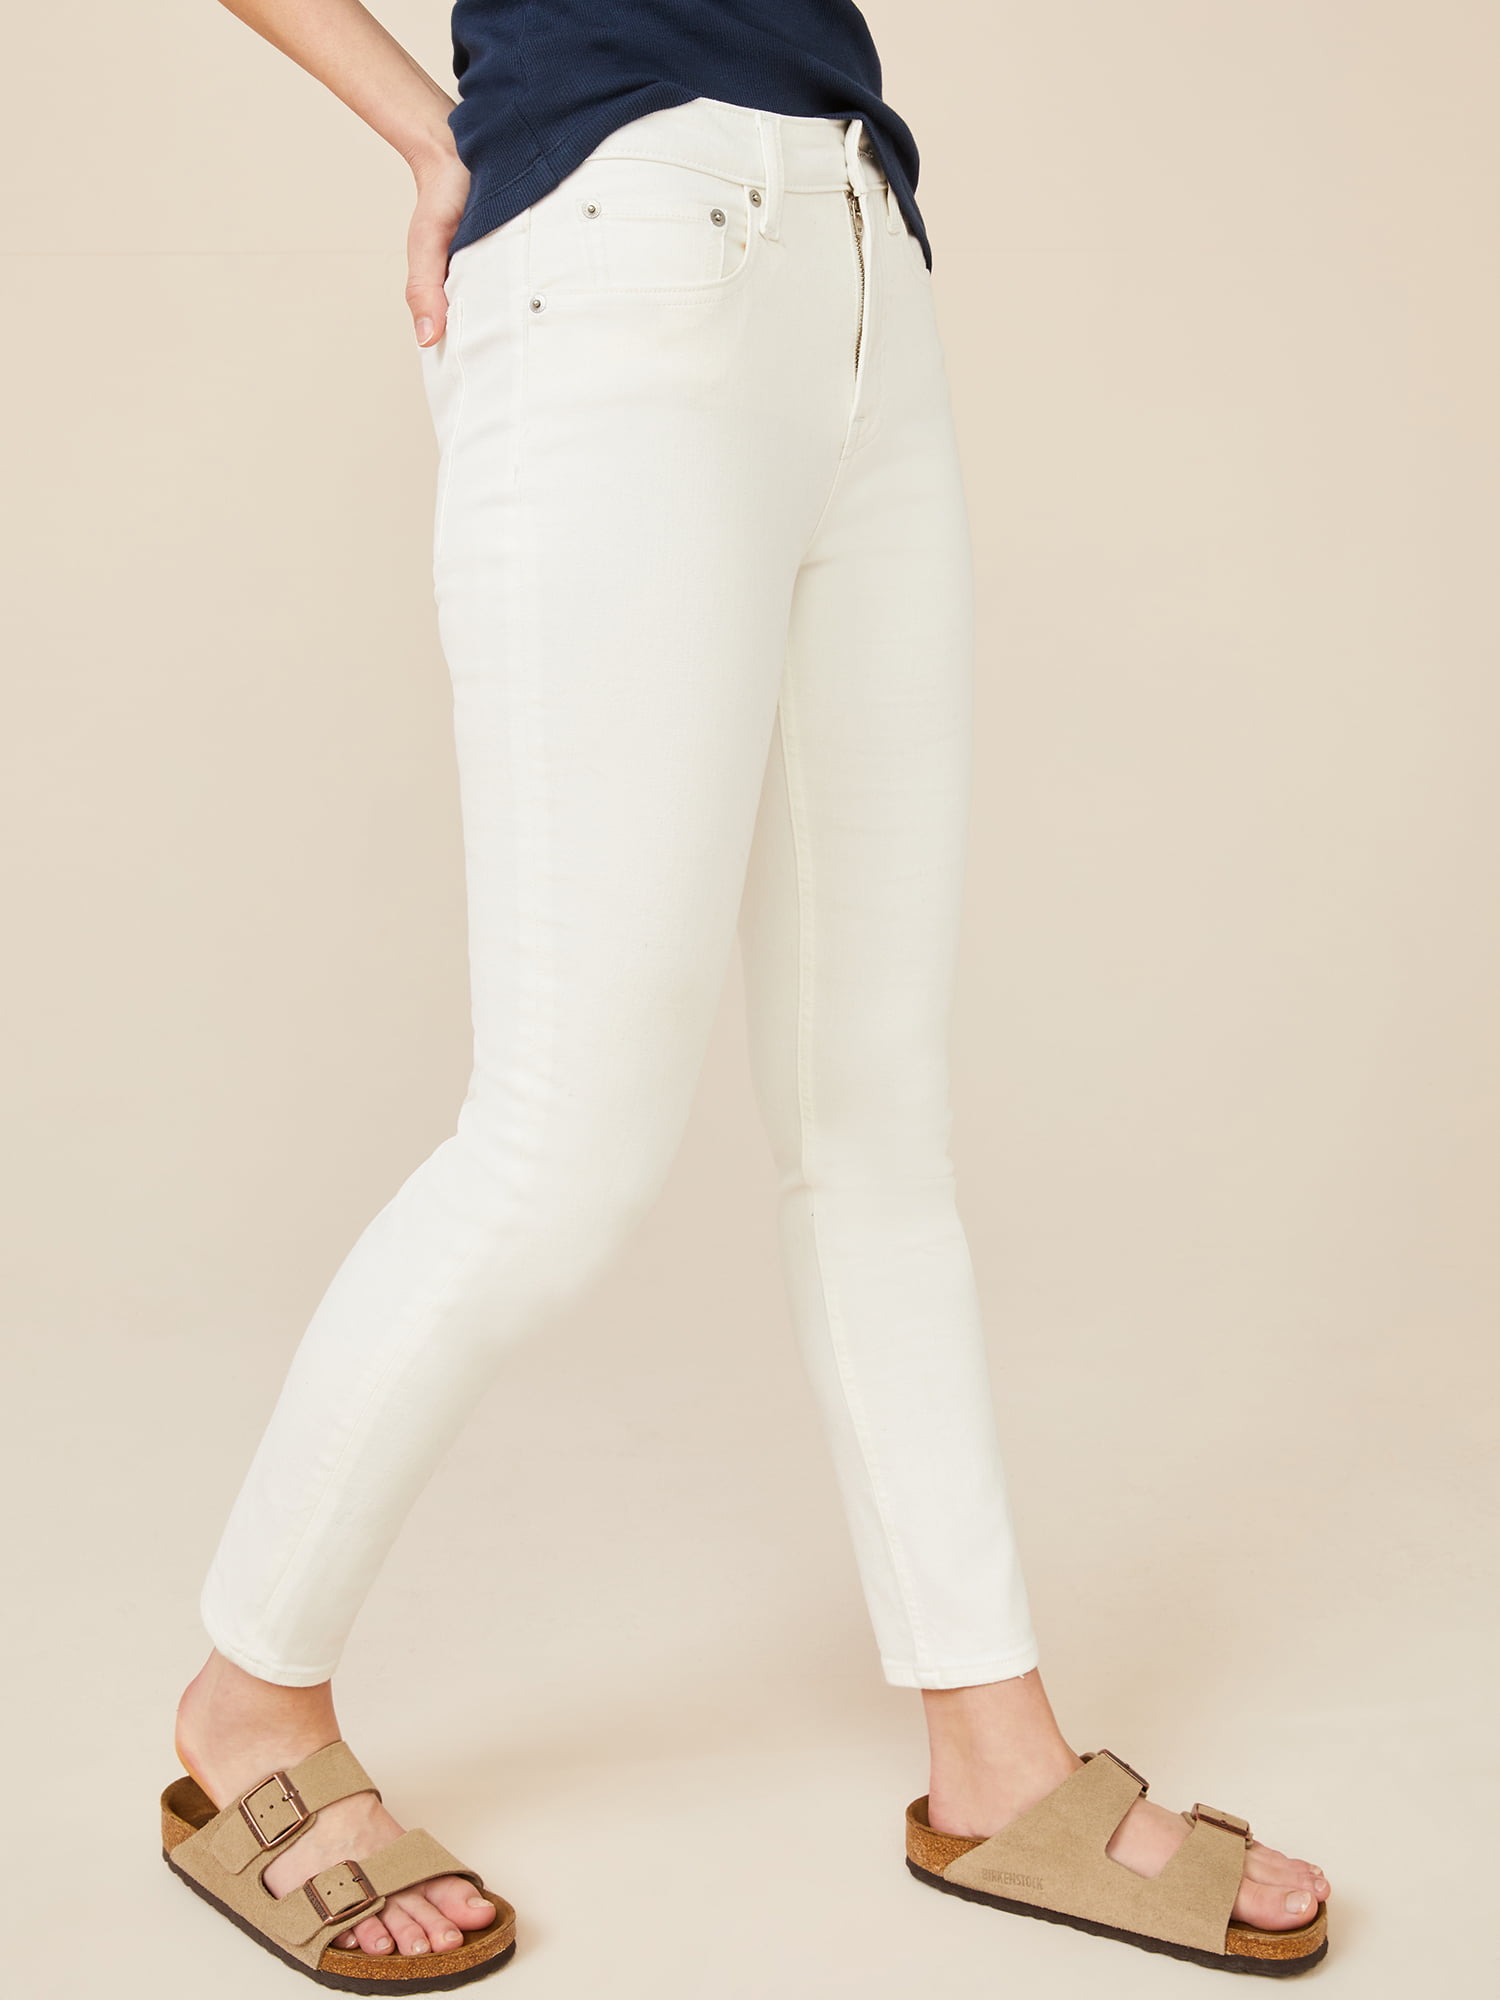 Free Assembly Women's High Rise Skinny Jeans - image 4 of 5